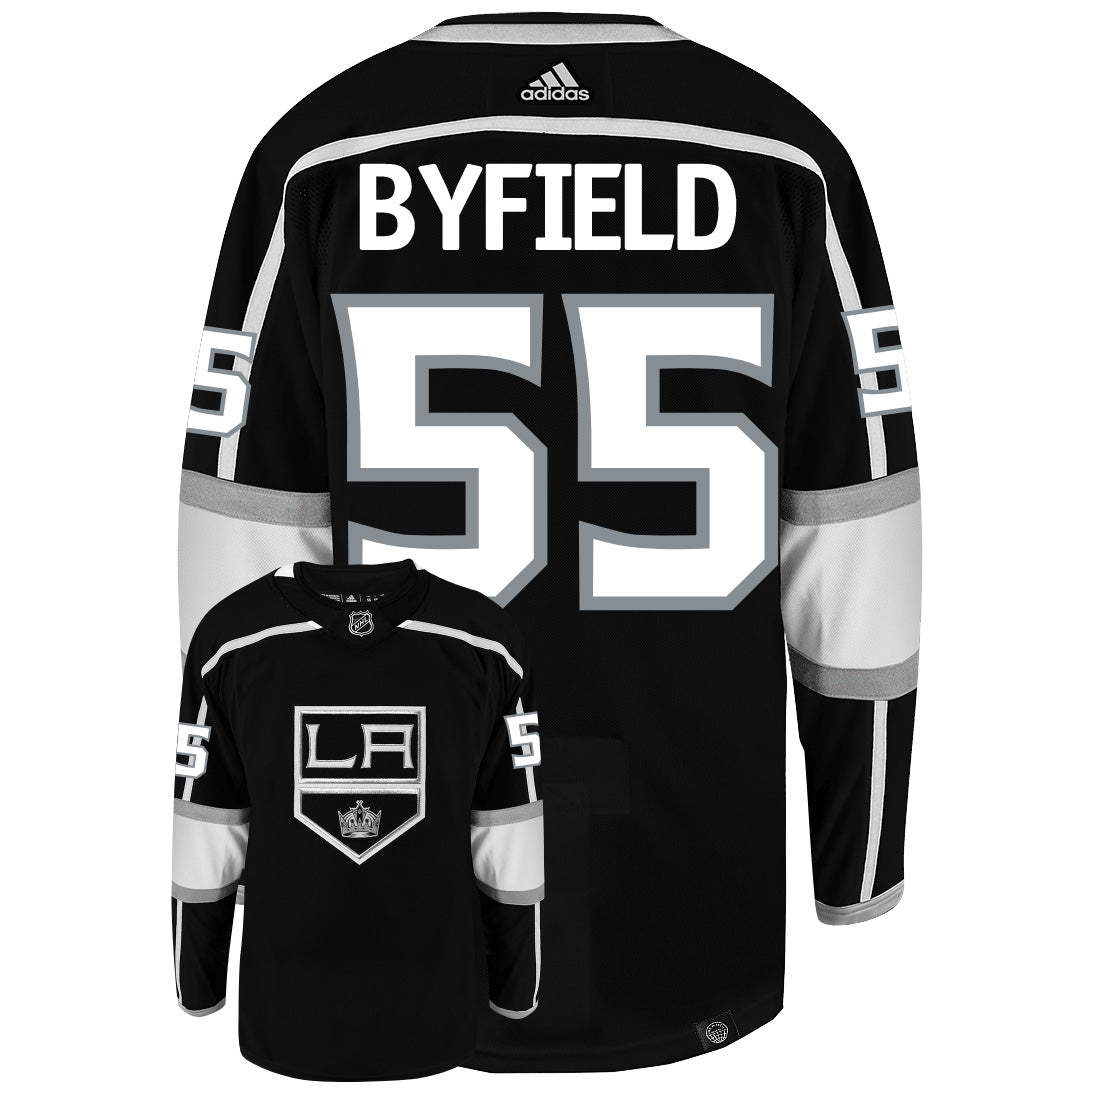 Quinton Byfield Los Angeles Kings Adidas Primegreen Authentic NHL Hockey  Jersey